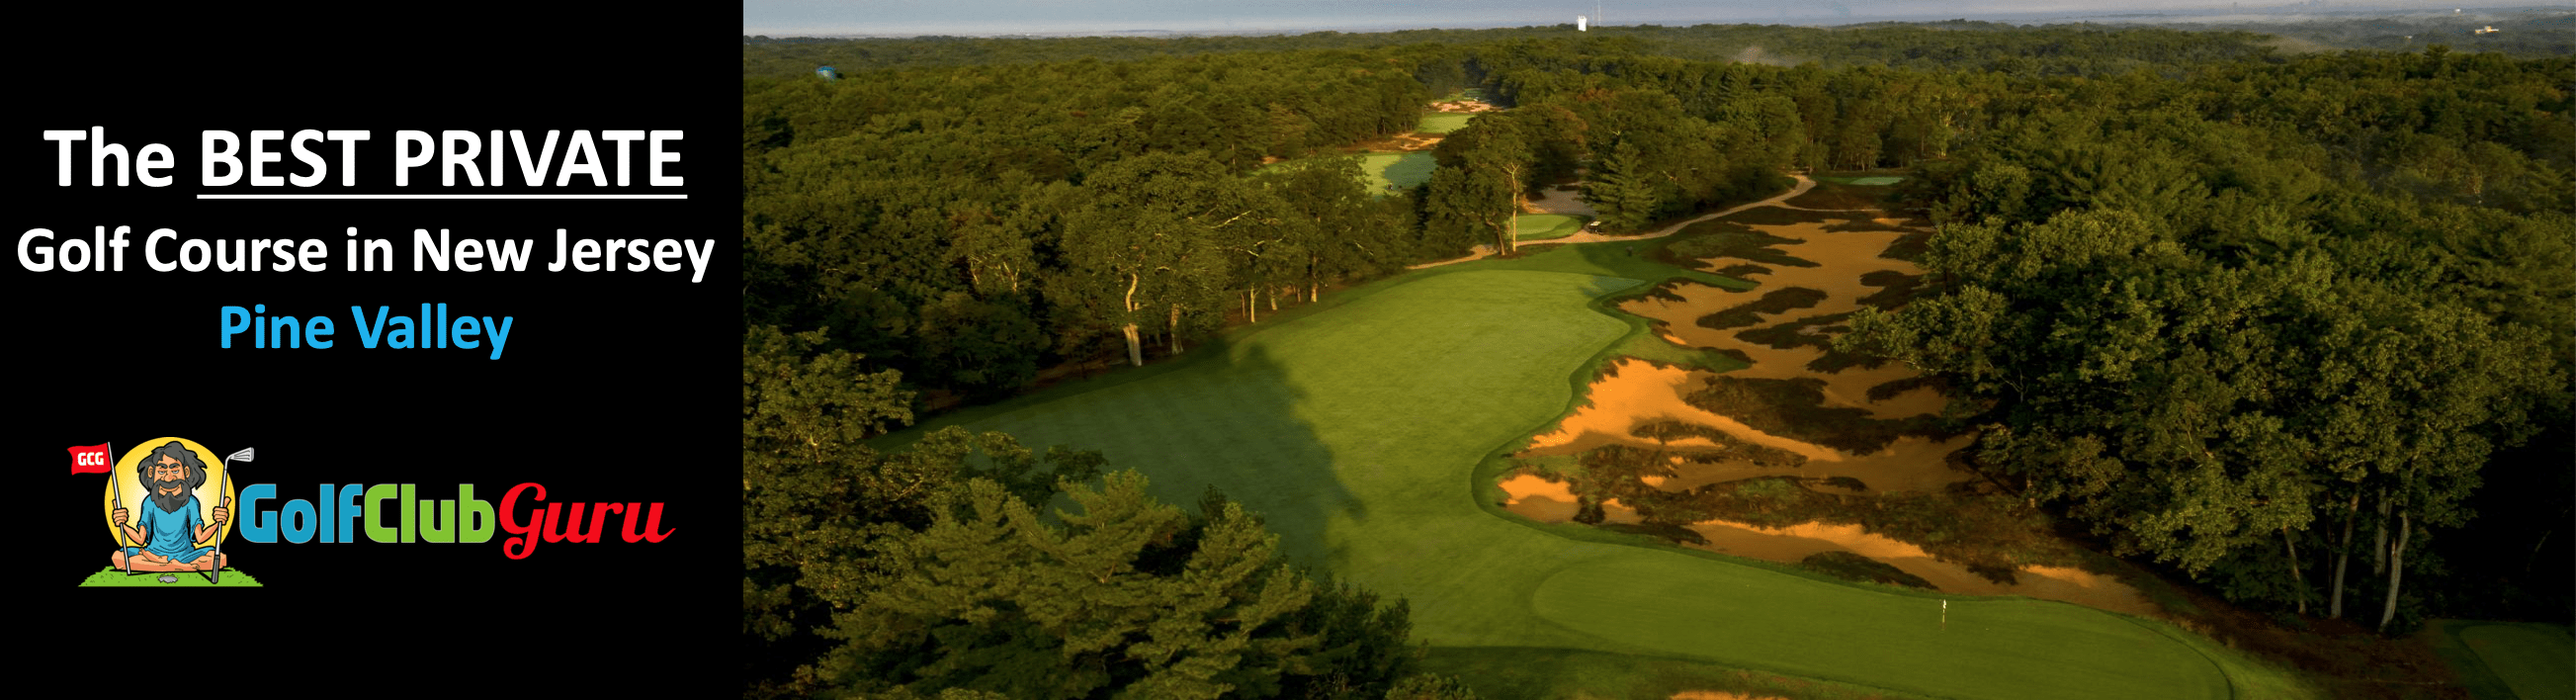 the best private golf club in new jersey pine valley ...